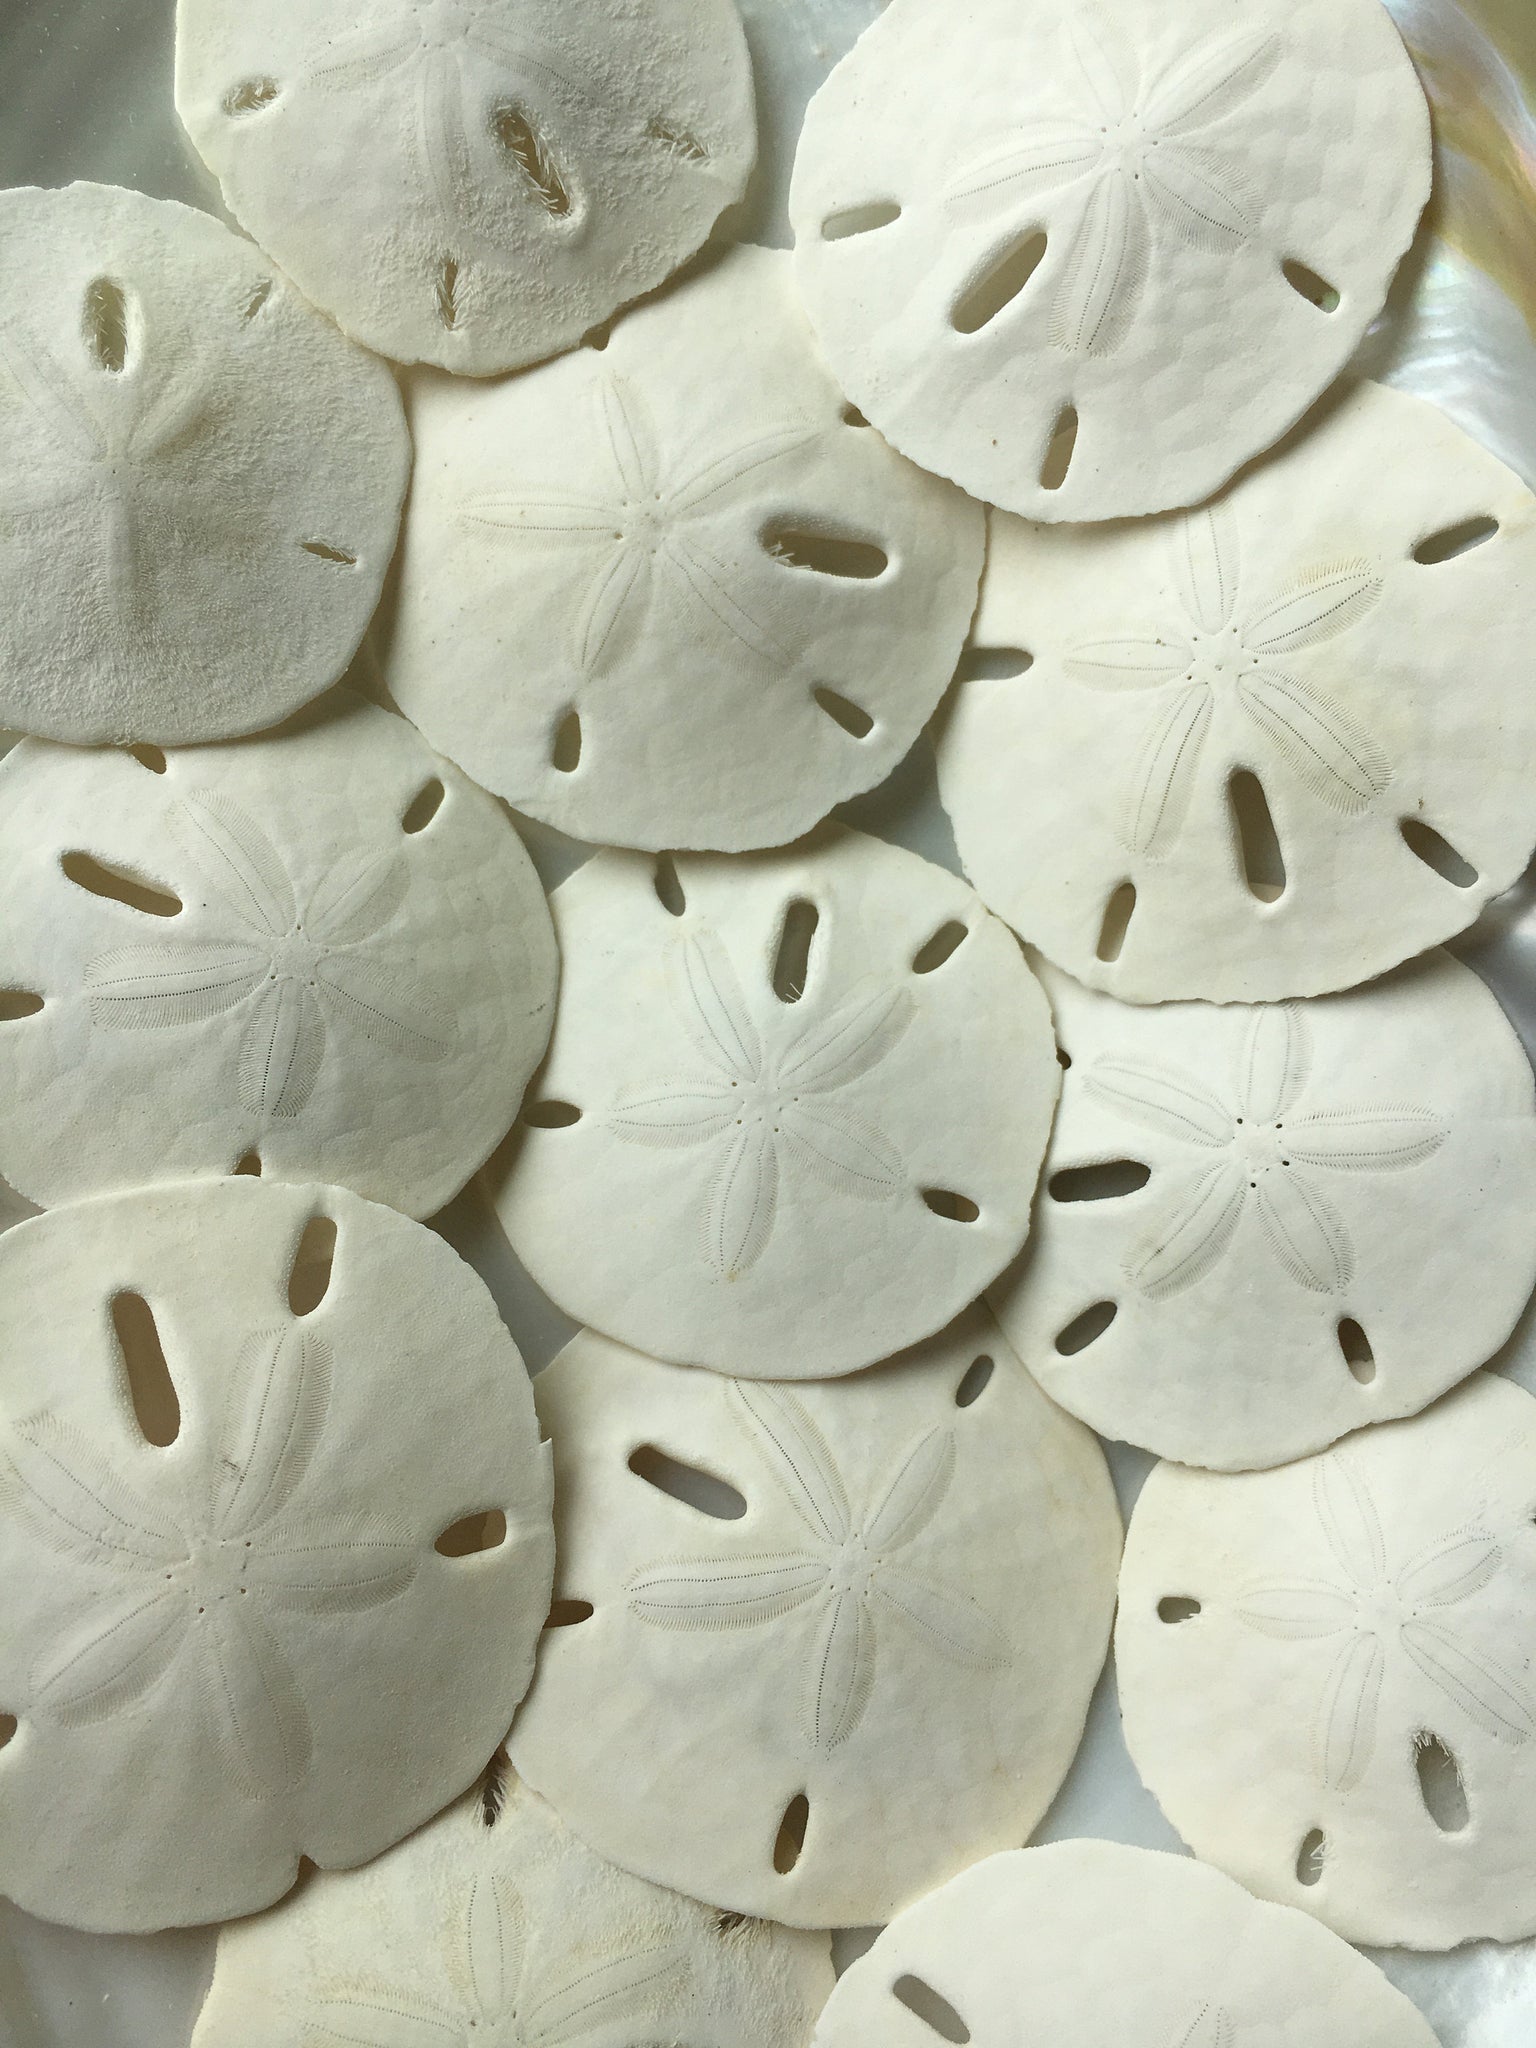 All Products - Sand Dollars - www.